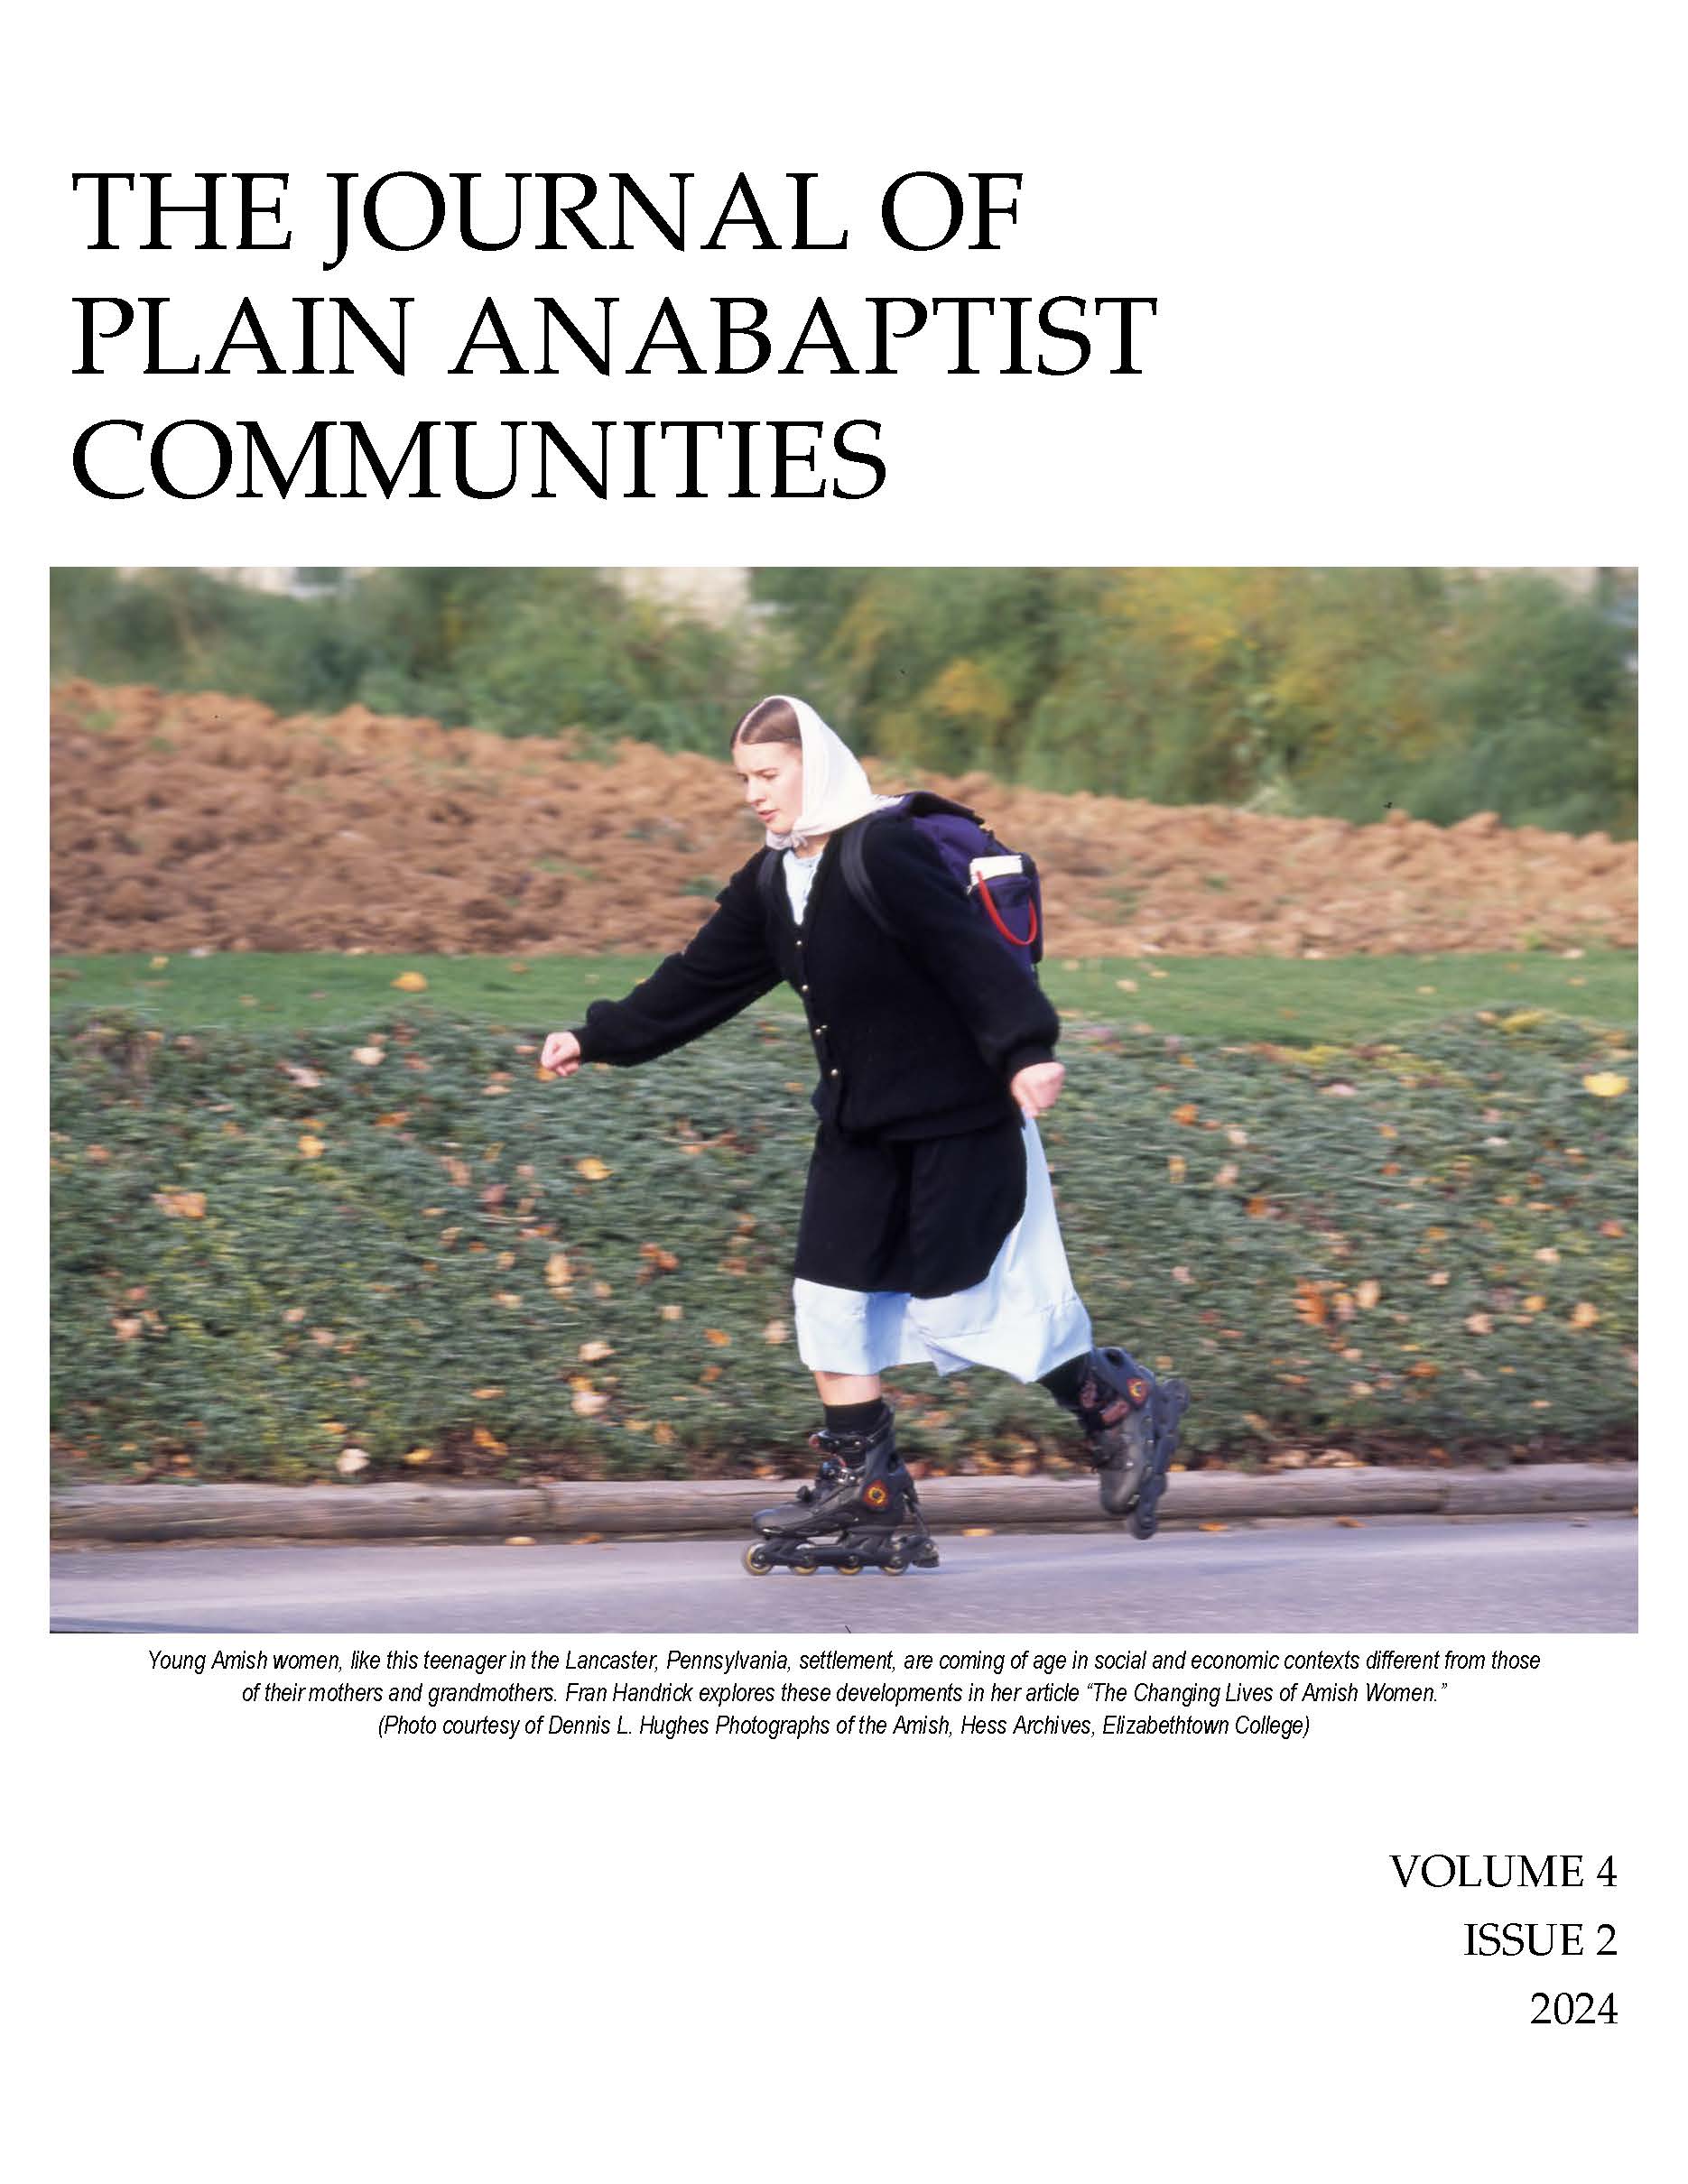 Cover for Vol. 4, No. 2 of The Journal of Plain Anabaptist Communities